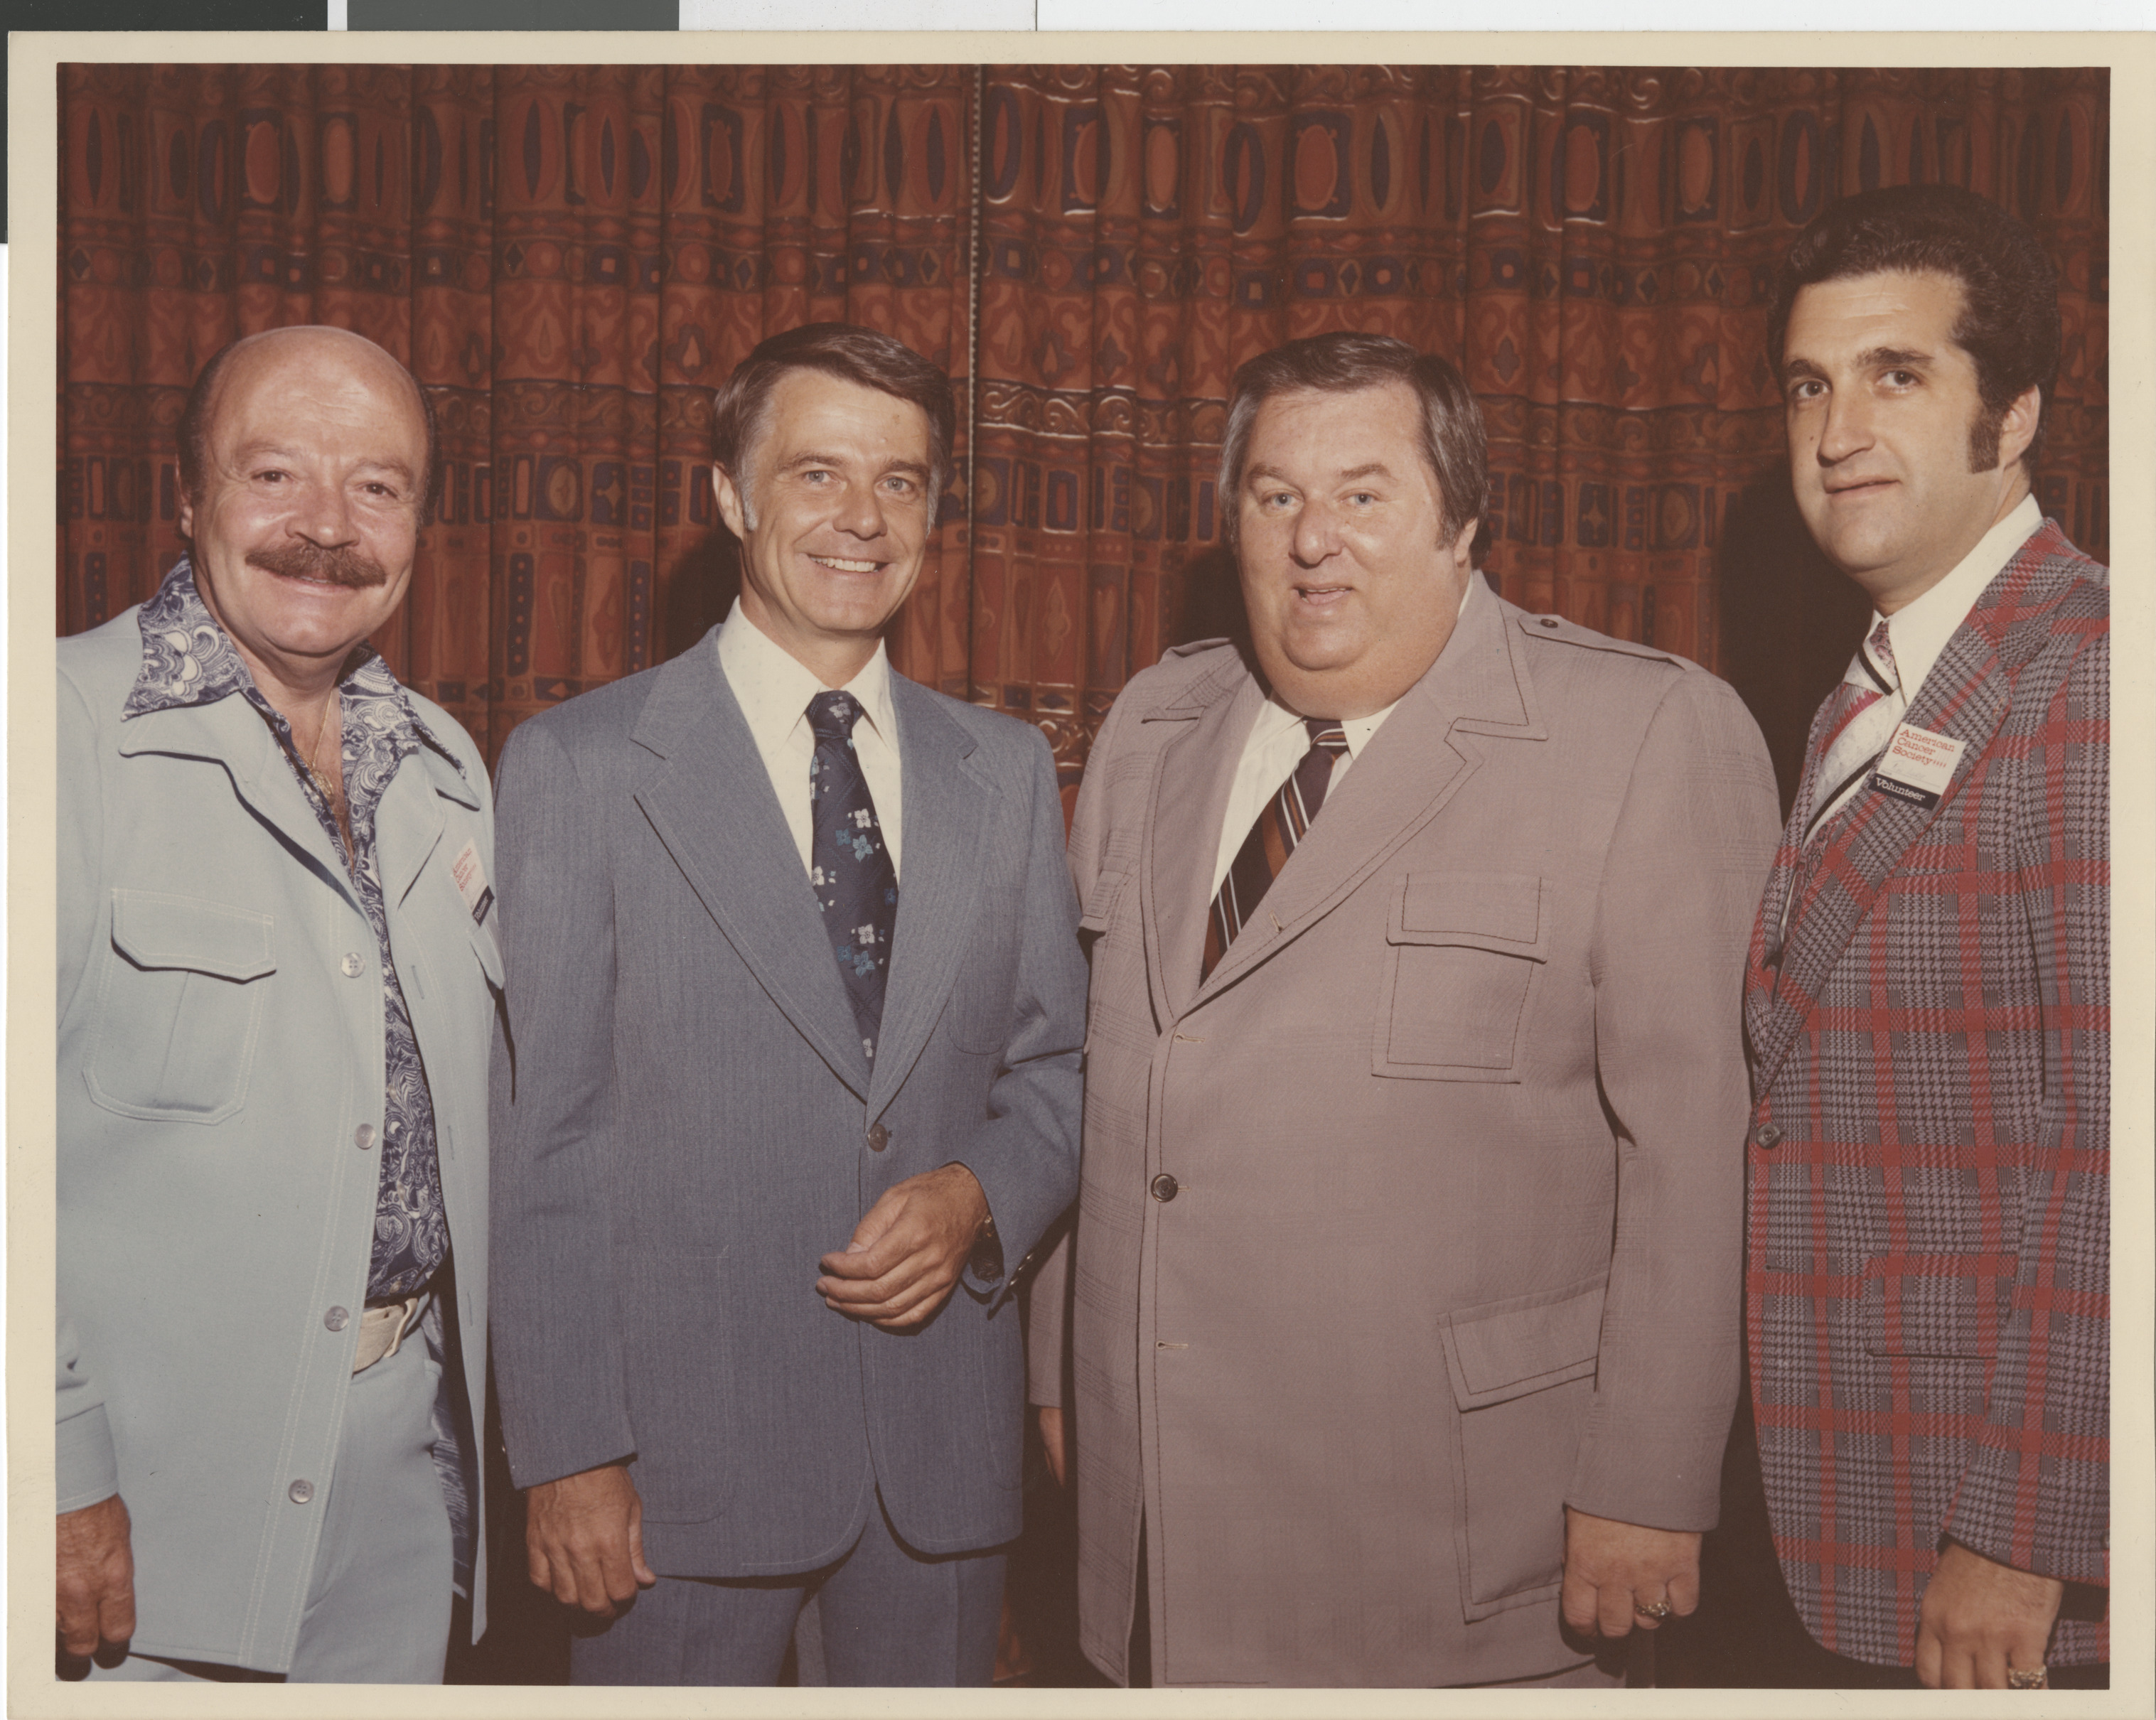 Photograph of Ron Lurie (right) with Mayor Bill Briare (second from left), and others